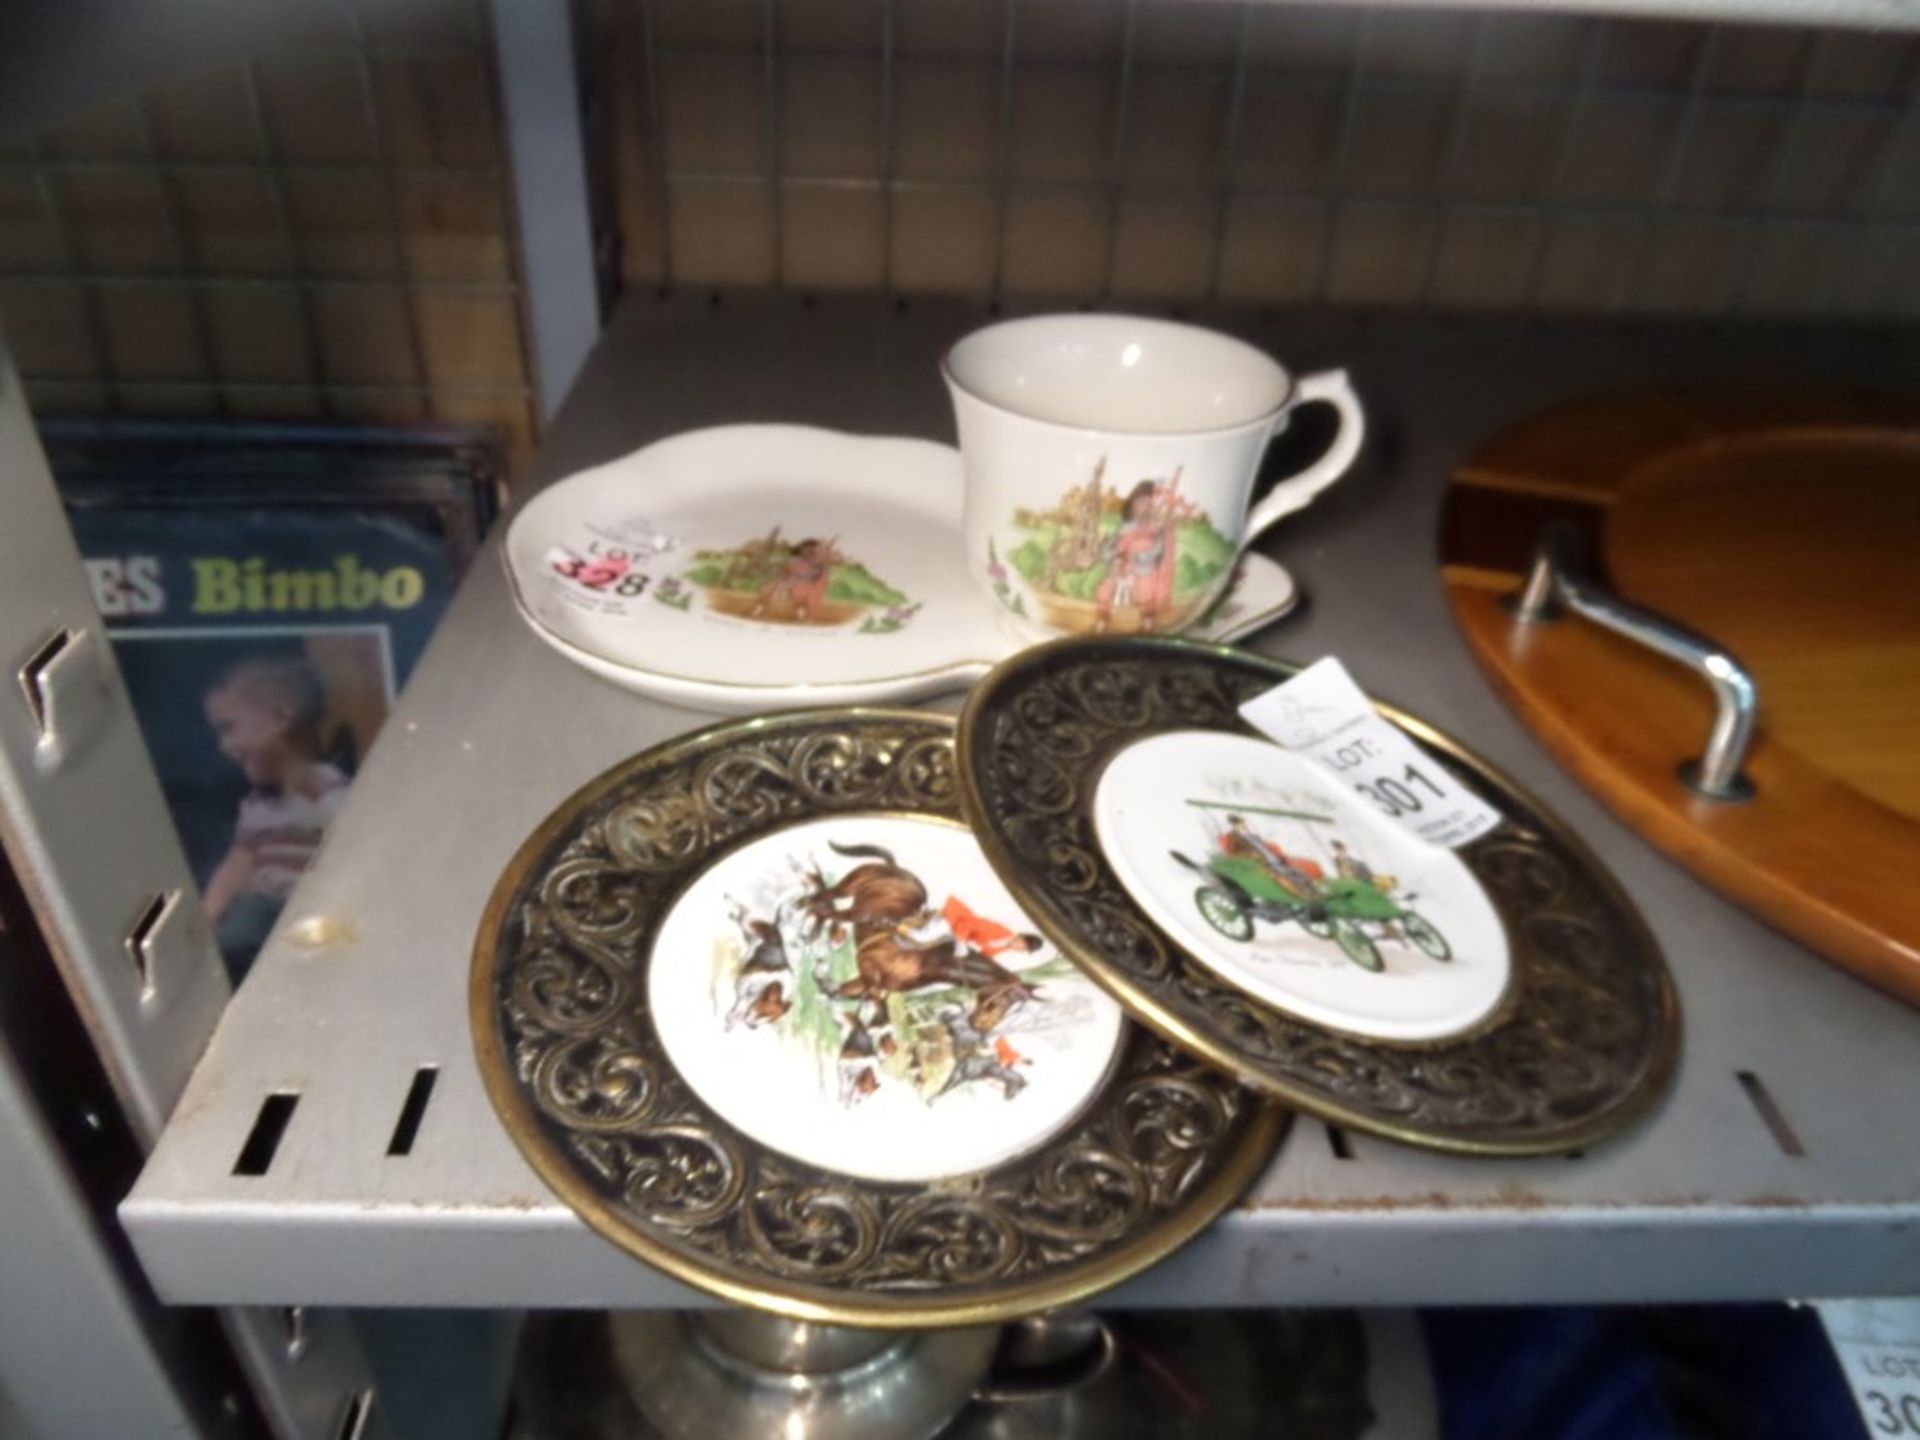 2 WALL PLATES AND SCOTTISH SOUVENIR CUP AND SAUCER